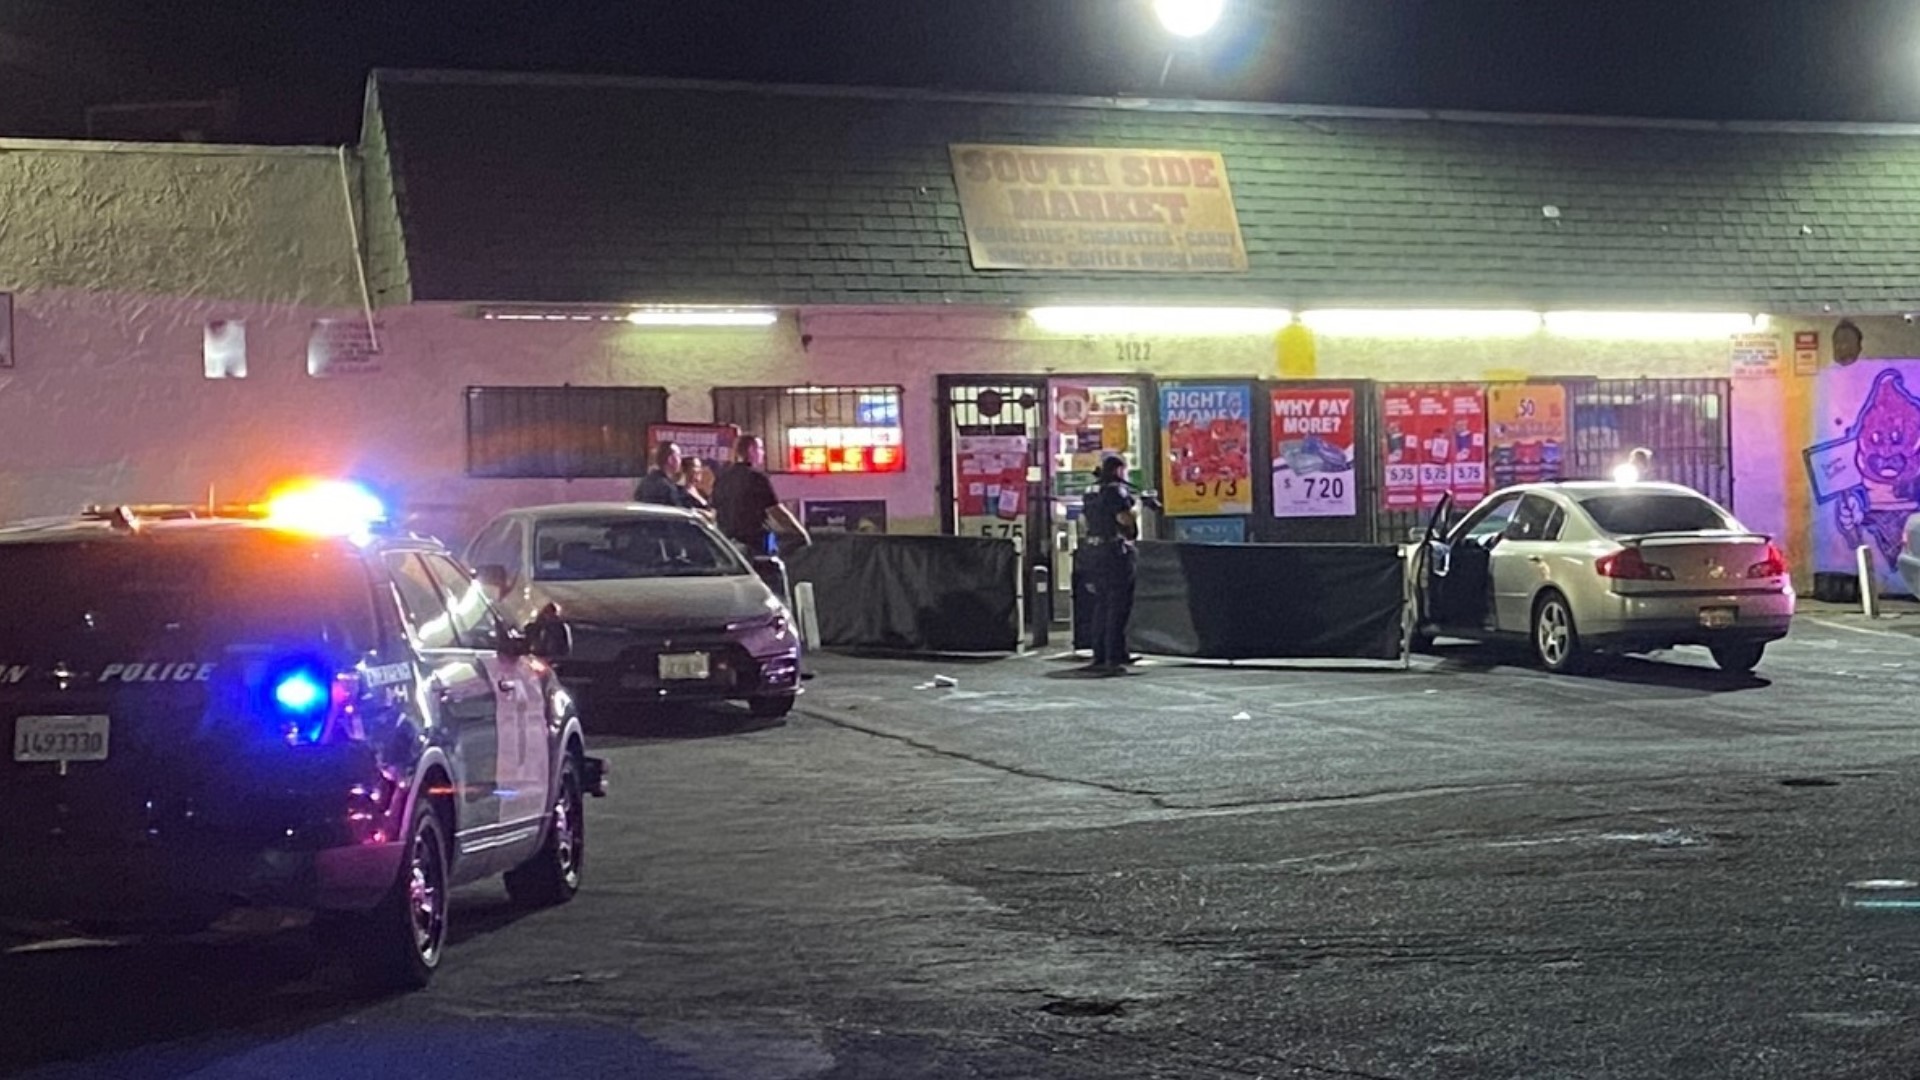 The Stockton Police Department are investigating a double shooting that left one person dead and another in the hospital at South Side Market on S. Airport Way.